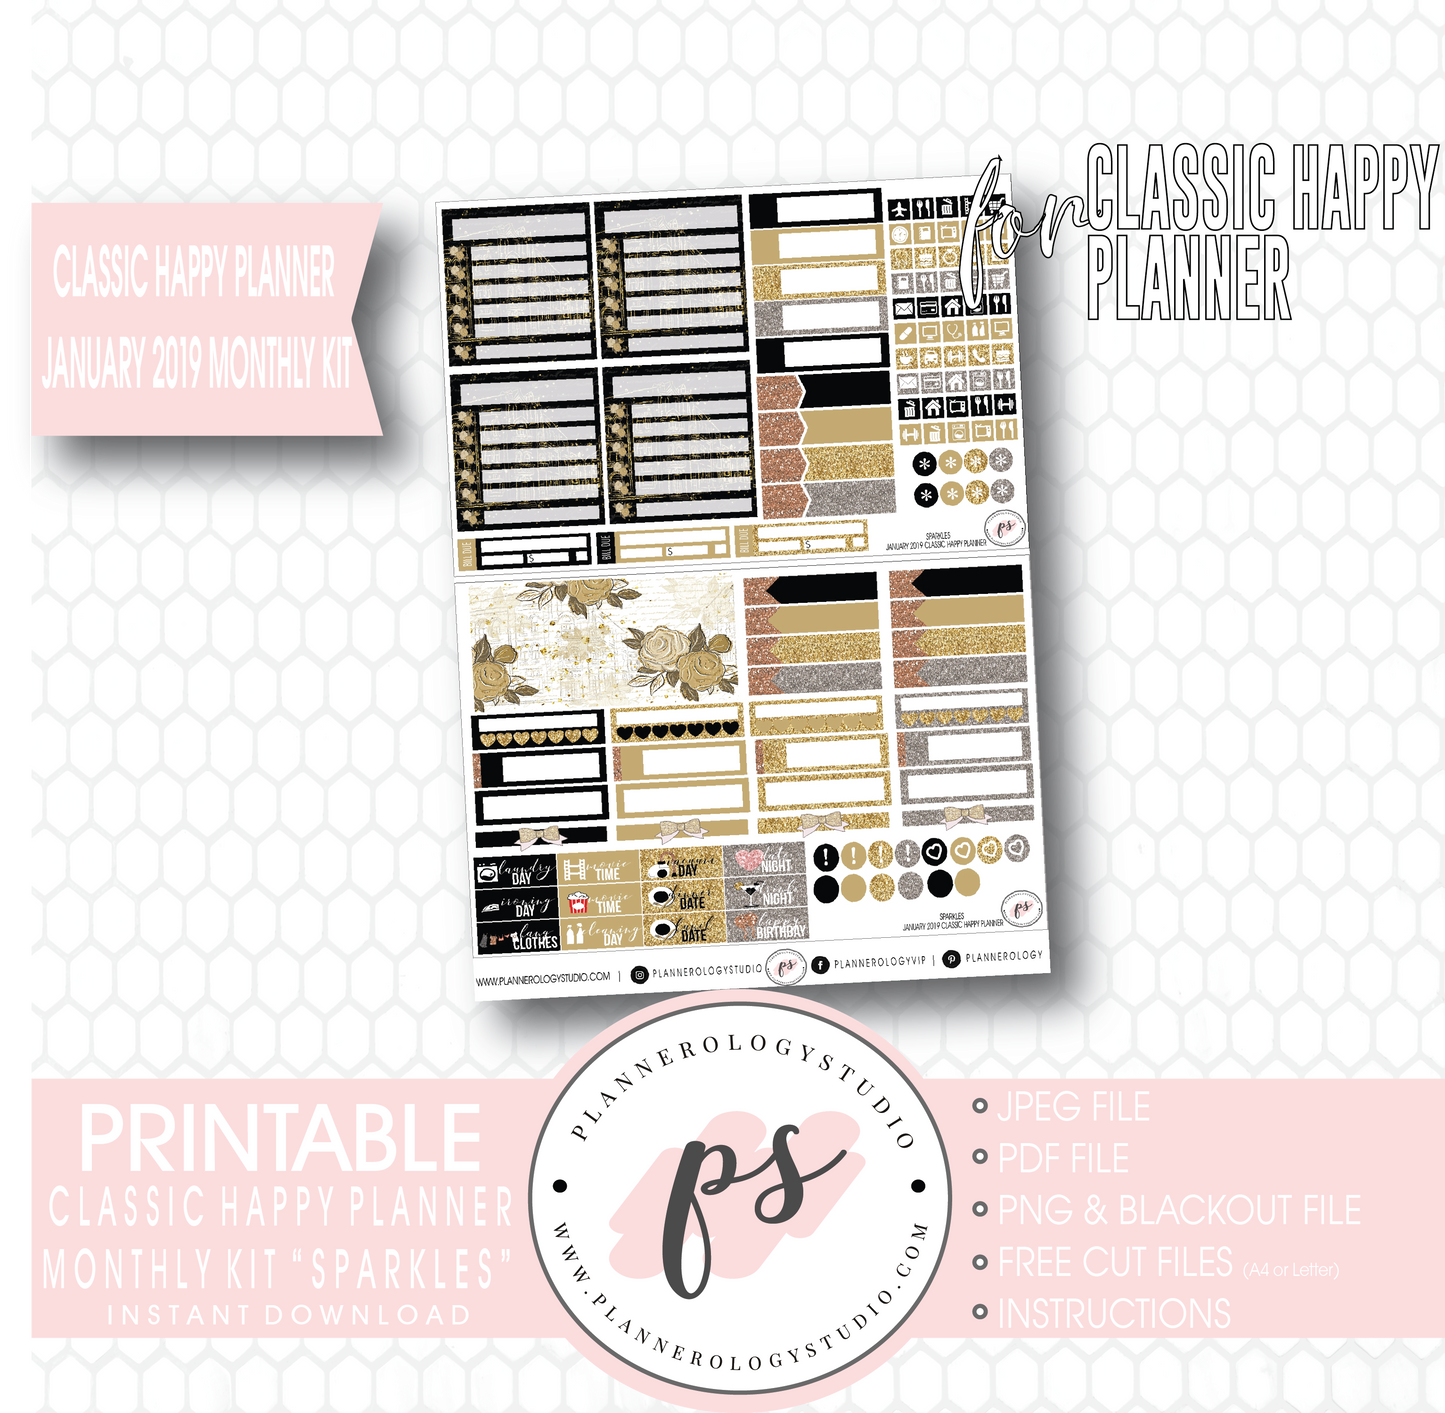 Sparkles New Years January 2019 Monthly View Kit Digital Printable Planner Stickers (for use with Classic Happy Planner) - Plannerologystudio